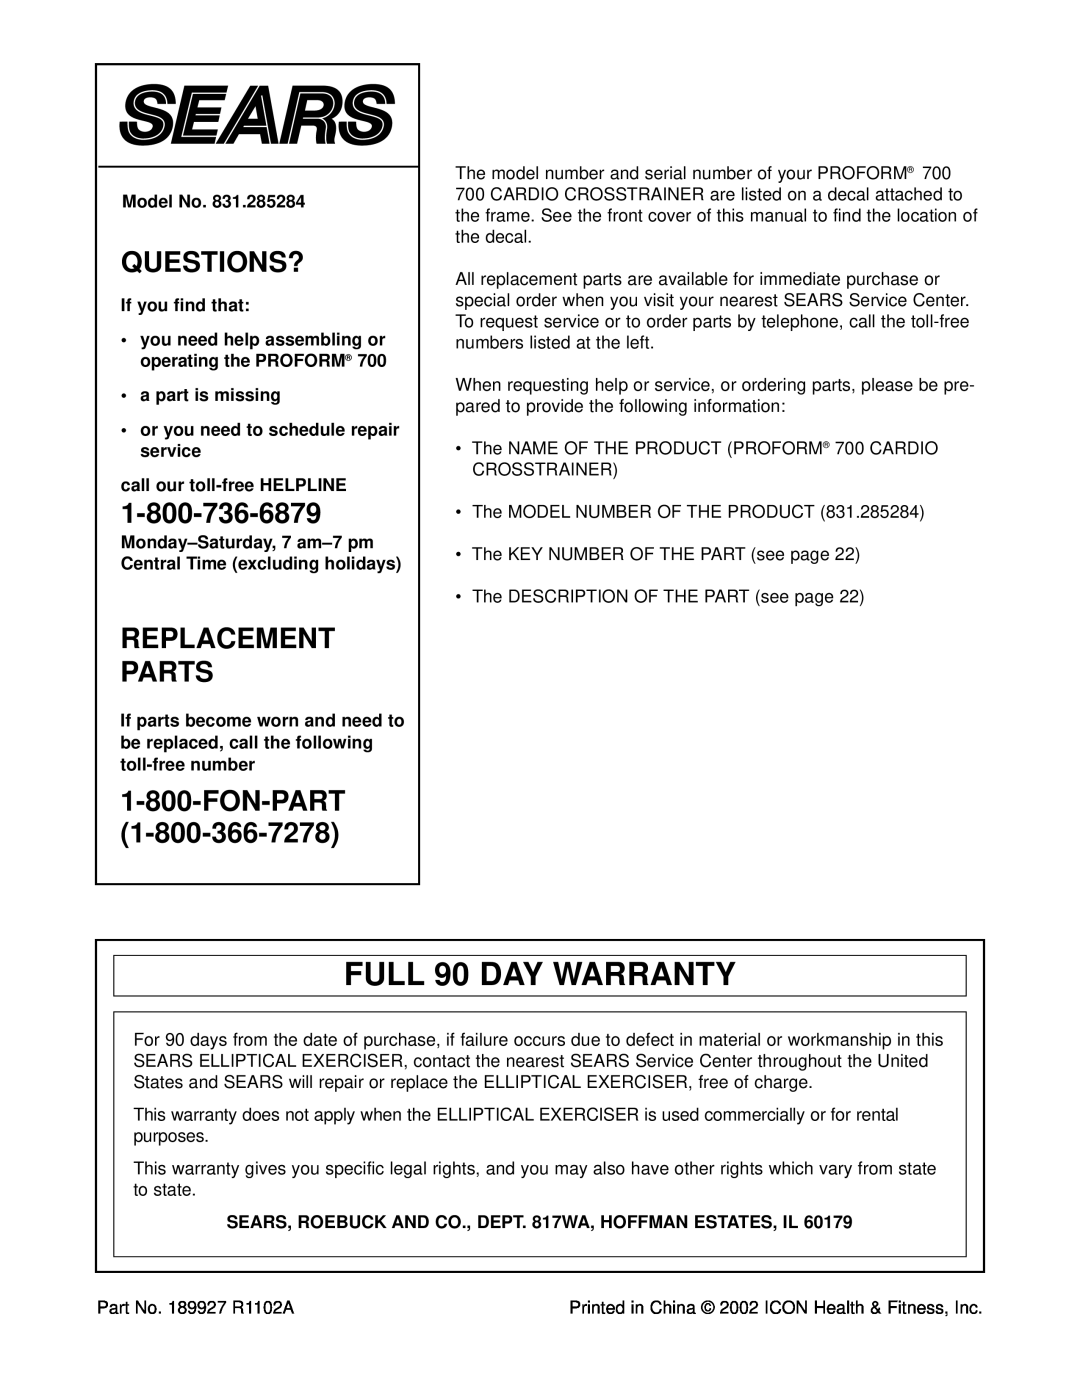 ProForm 831.285284 user manual FULL 90 DAY WARRANTY, Questions?, Replacement Parts, Fon-Part, Model No, If you find that 